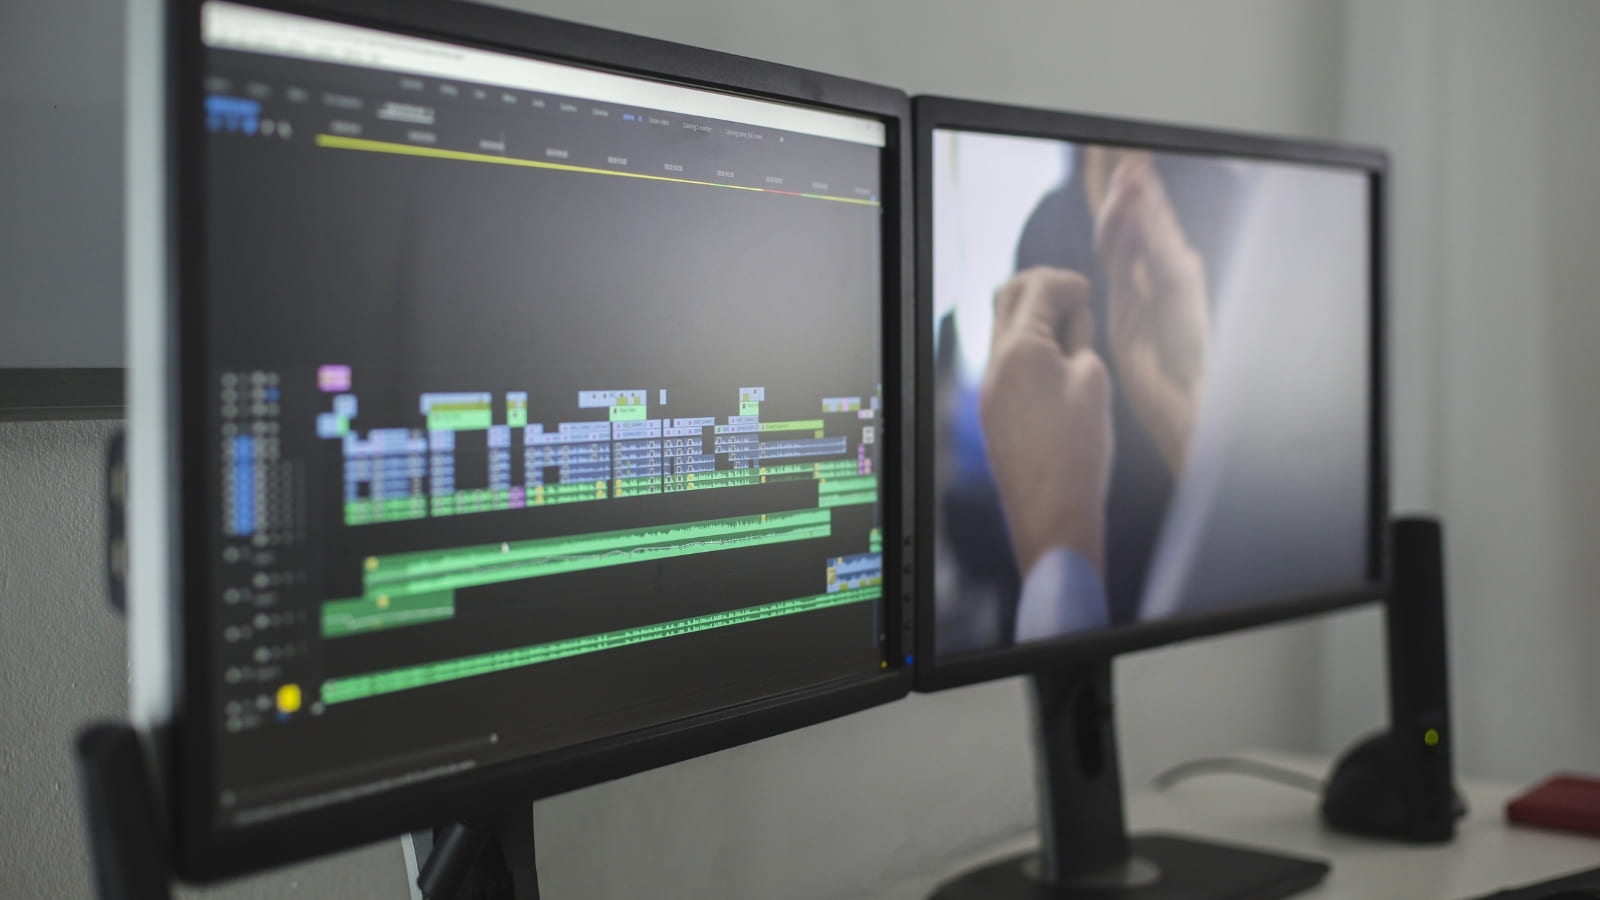 A close up image of two computer screens that show film editing software